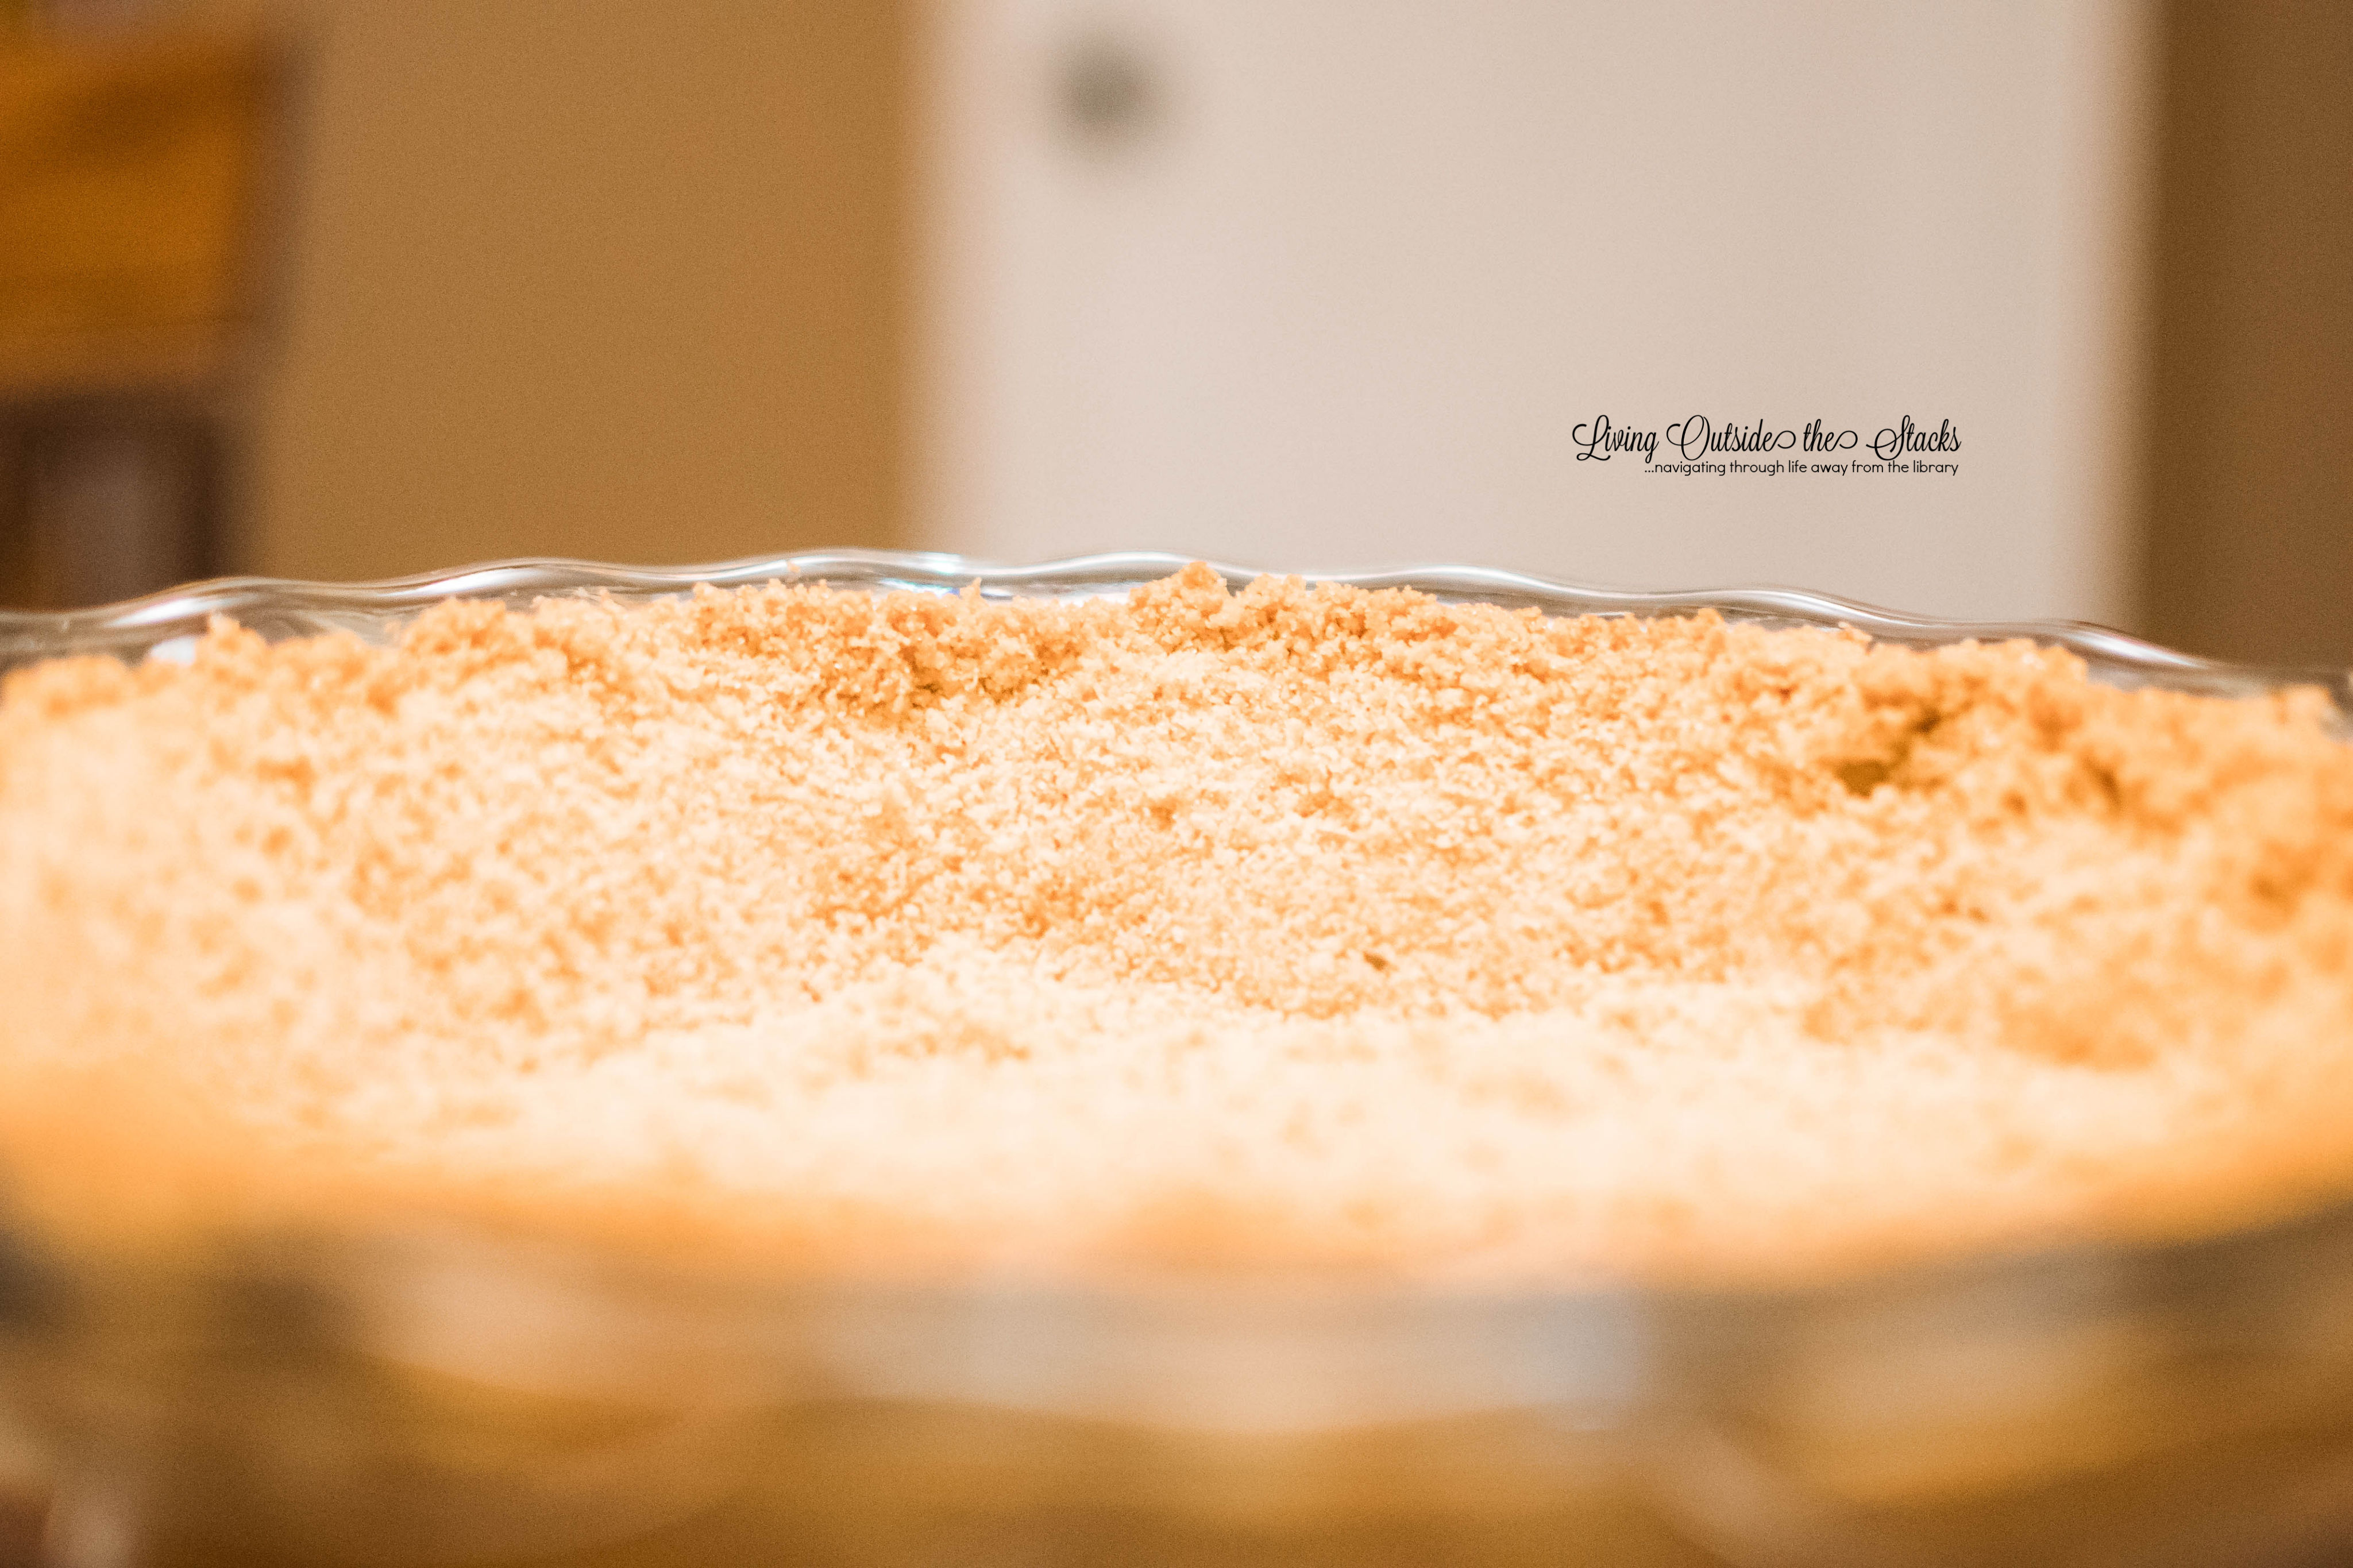 Butterscotch Pie with Curry Crust {living outside the stacks} #coffeeandpiechat